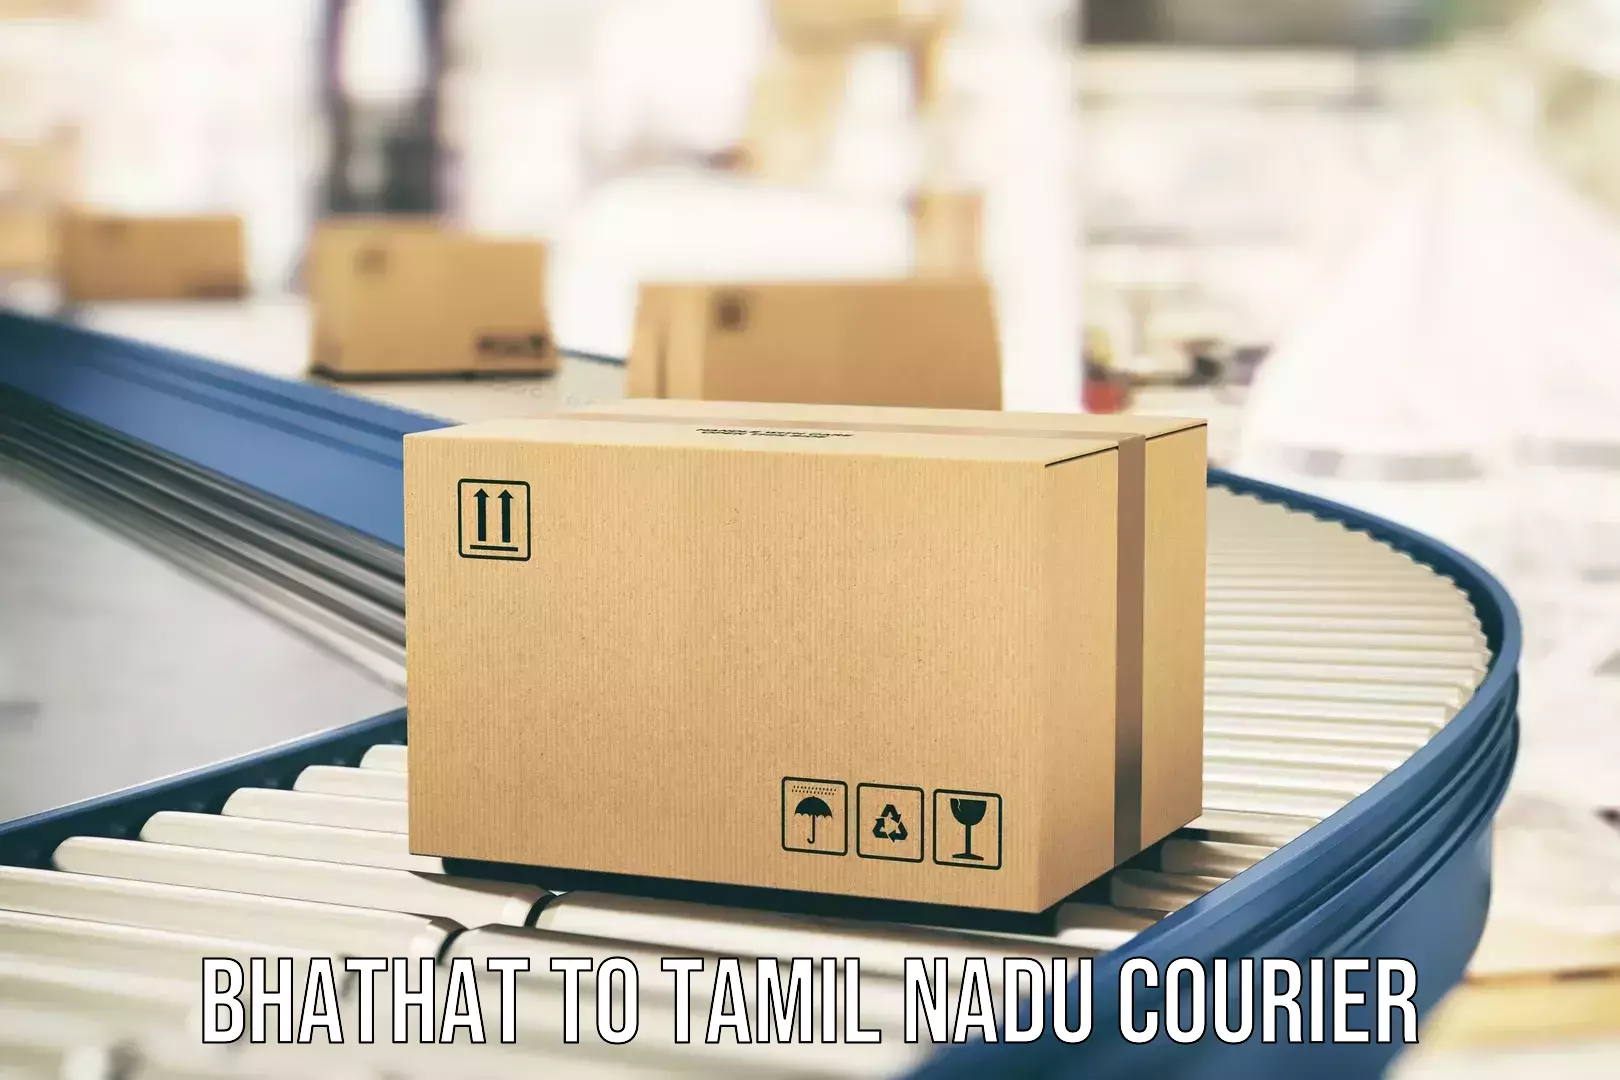 Furniture shipping services Bhathat to Chengalpattu